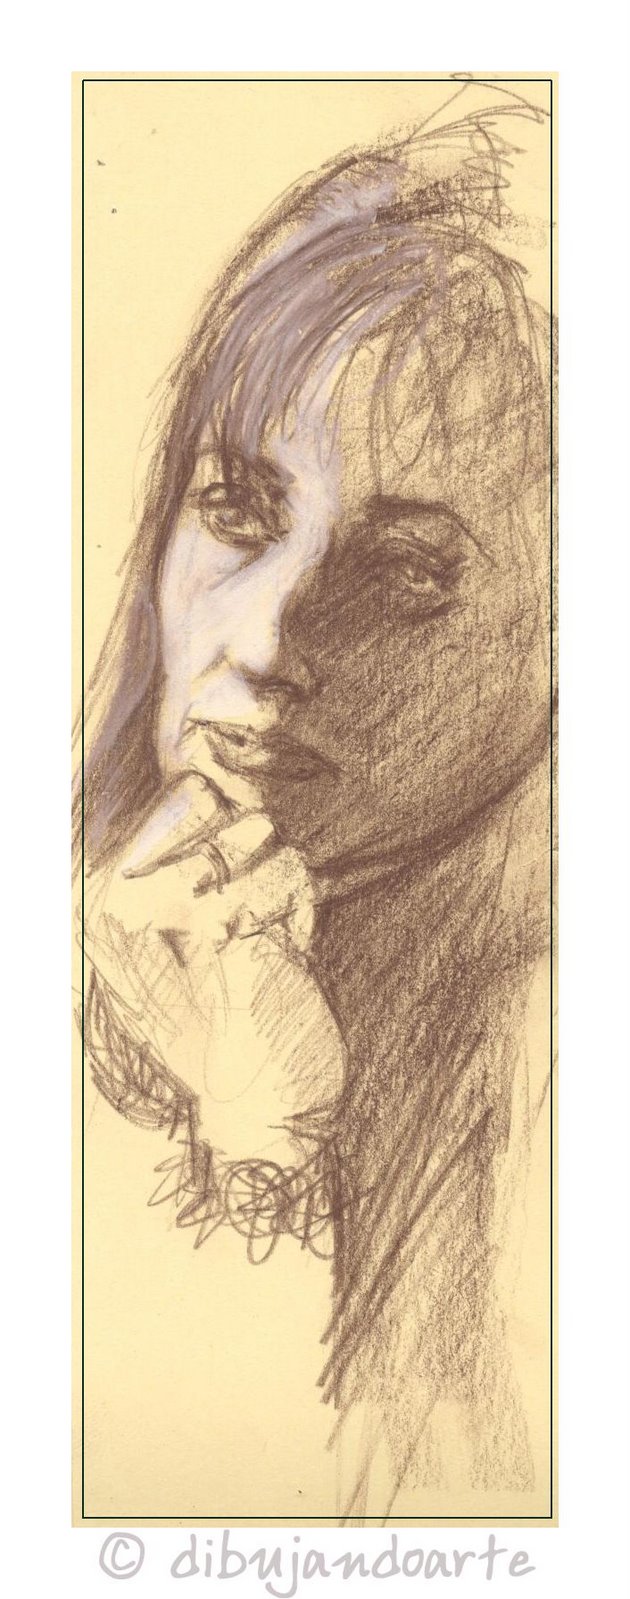 [rvw+-+sepia+and+white+pastel+on+coloured+paper-b-712076.jpg]